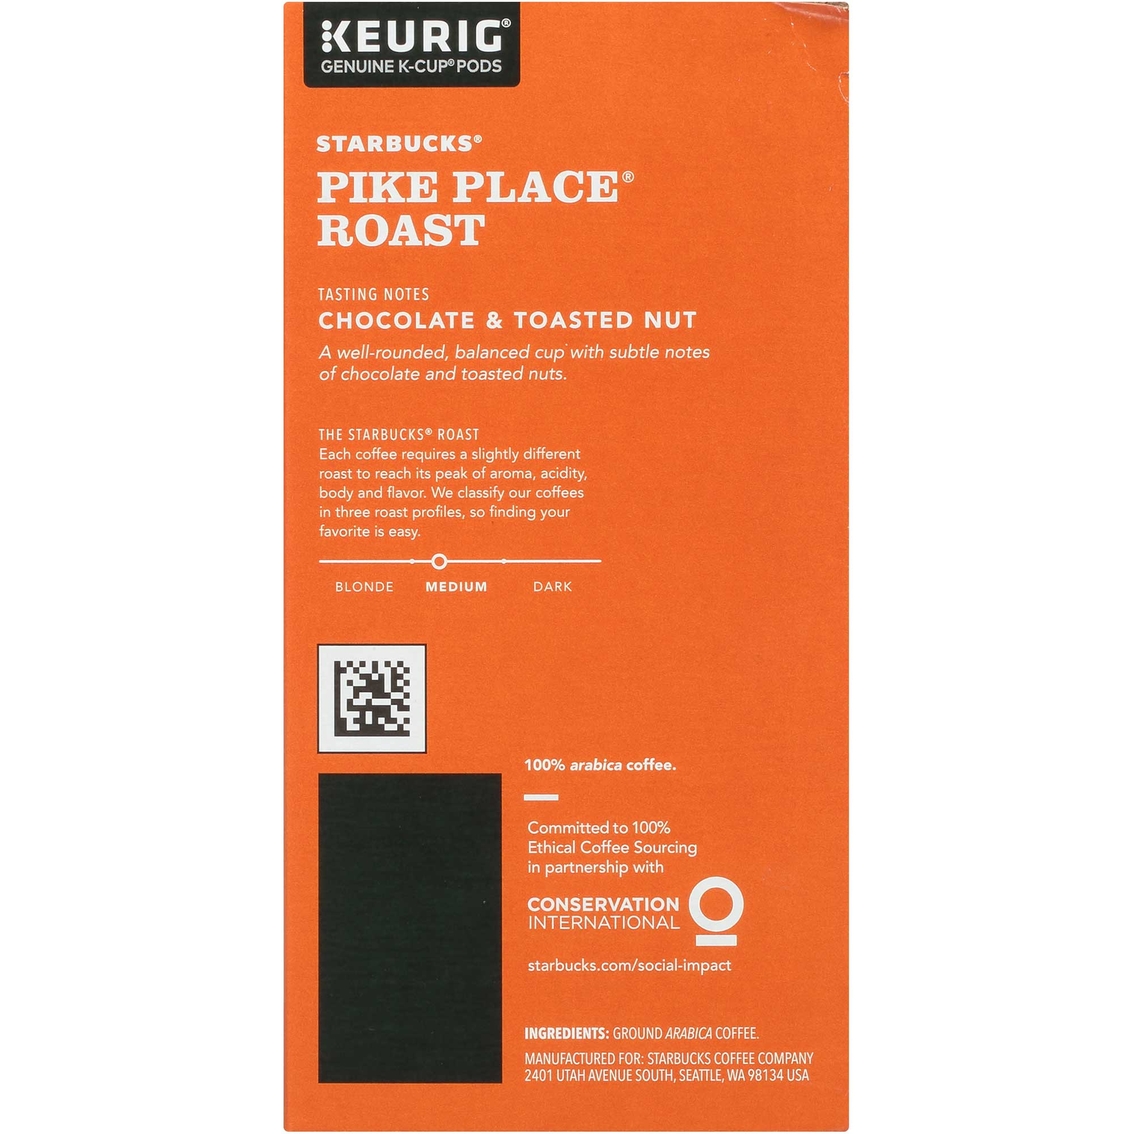 Starbucks K-Cup Pike Place Roast Coffee Pods 22 ct. - Image 5 of 6